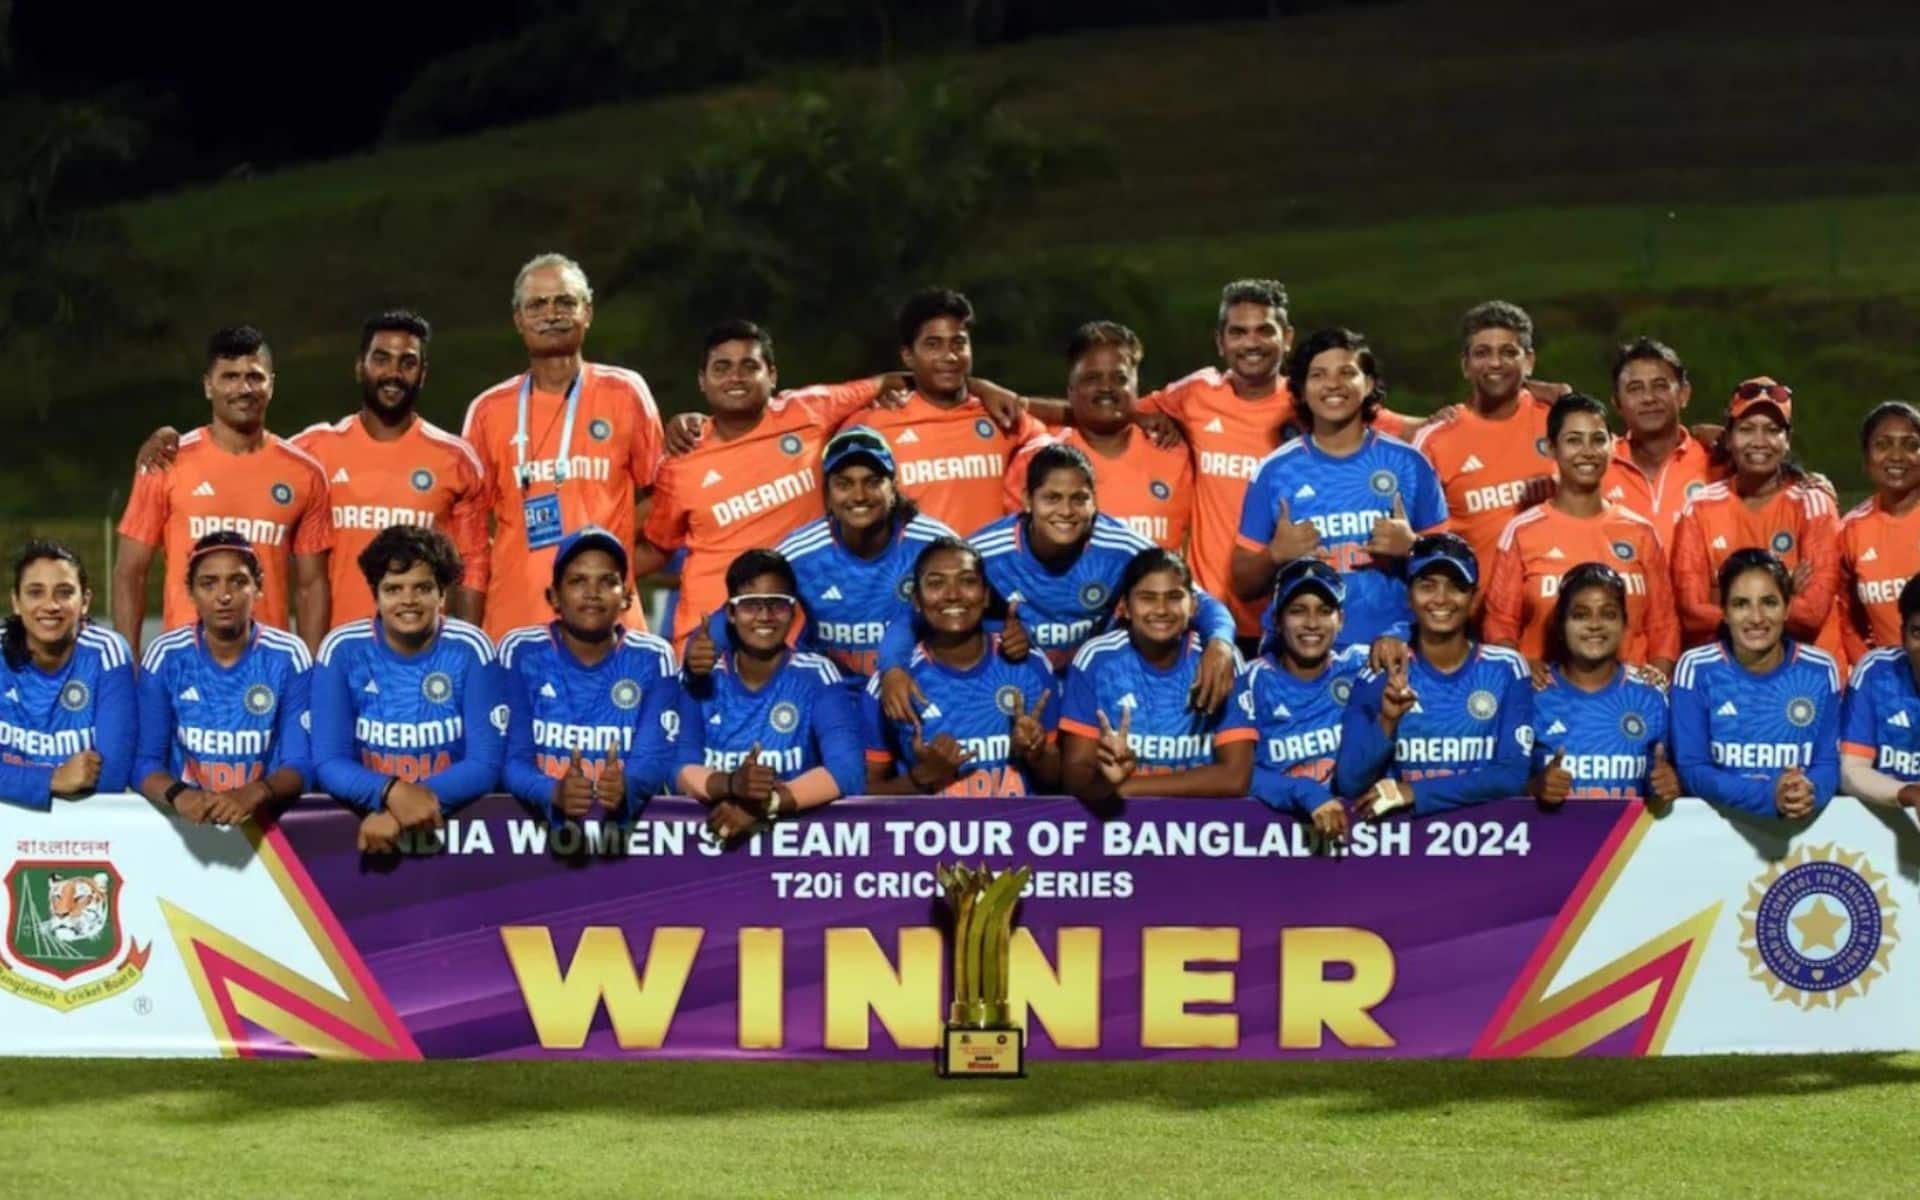 Indian team with the T20I series winner's trophy in Bangladesh in May 2024 (BCB)